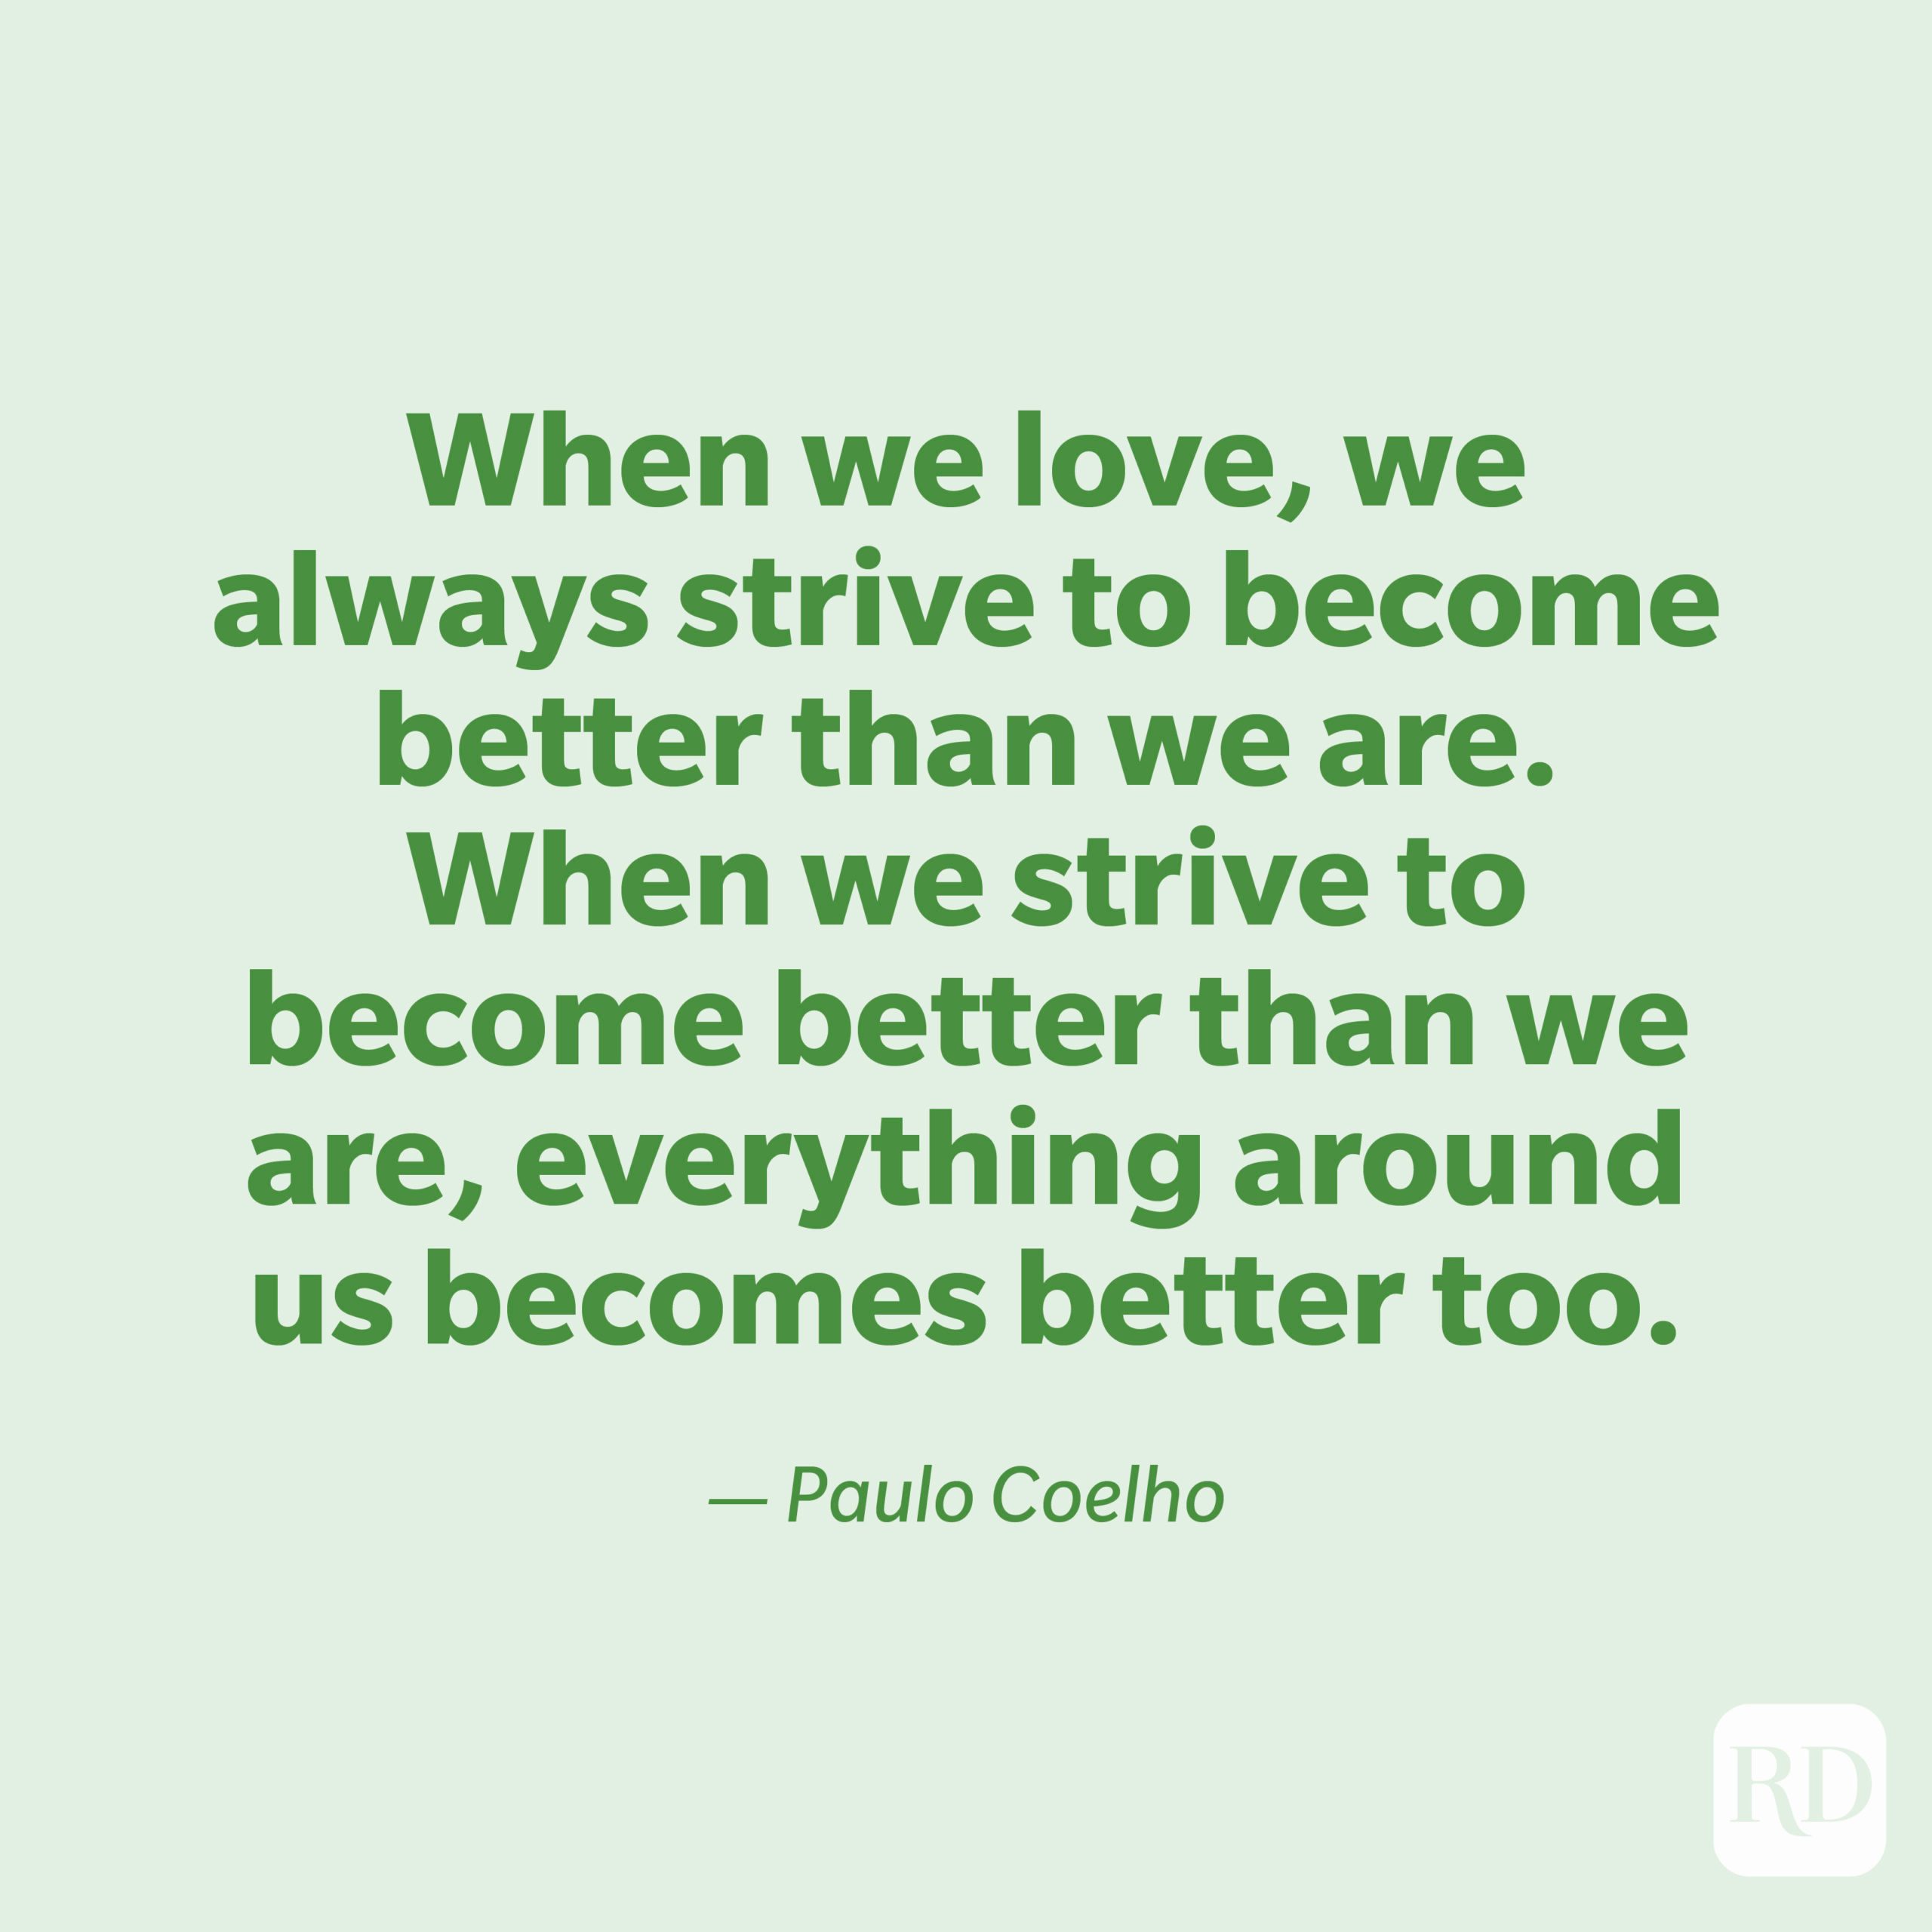 "When we love, we always strive to become better than we are. When we strive to become better than we are, everything around us becomes better too." —Paulo Coelho